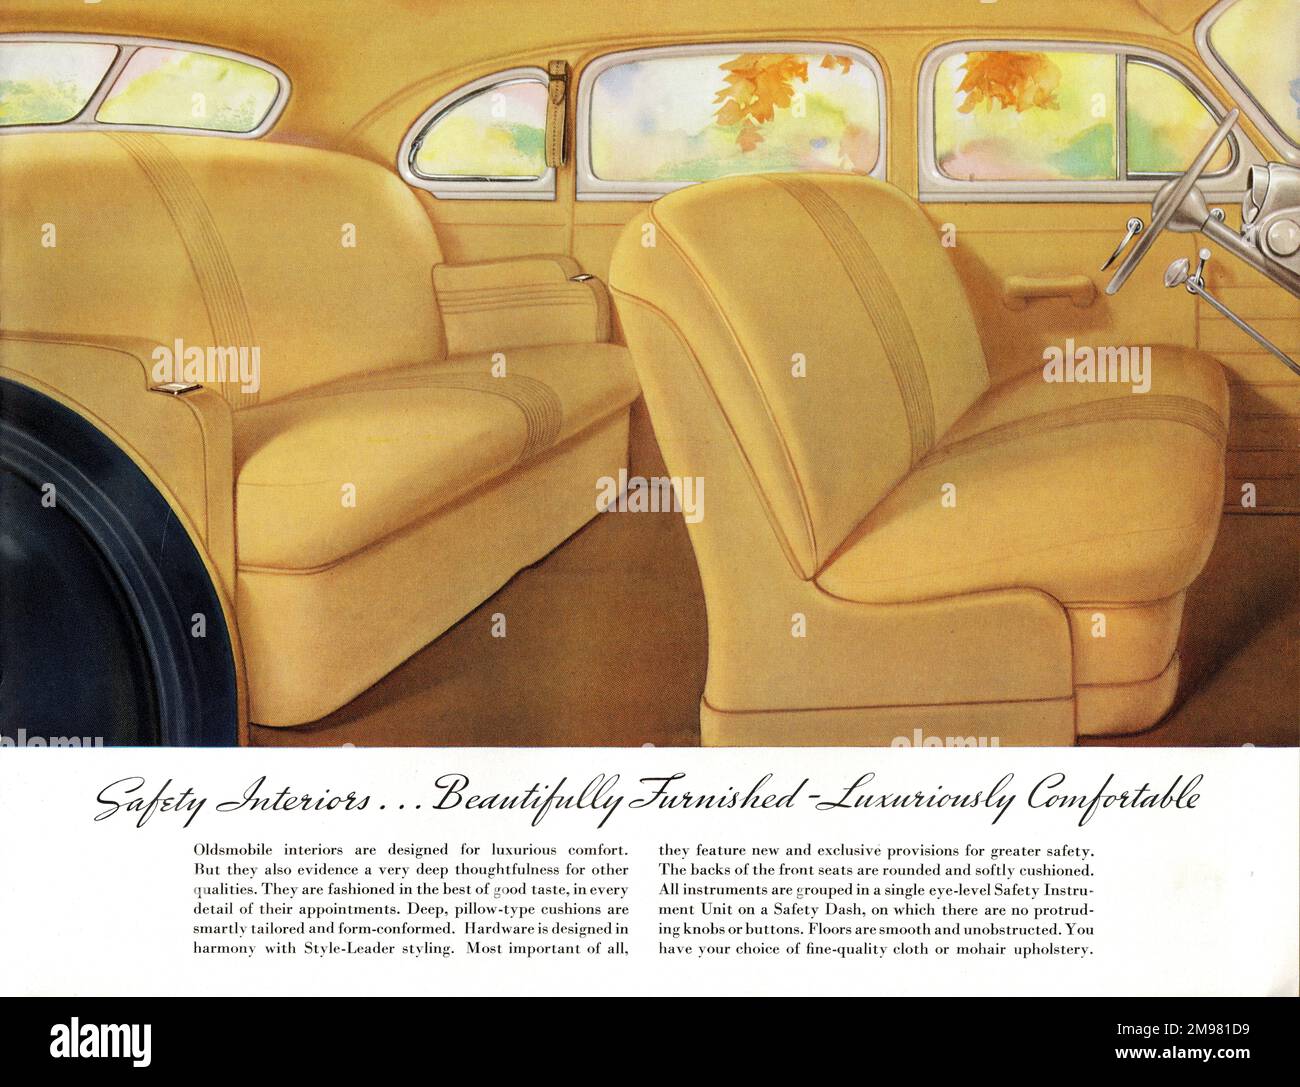 Brochure illustration, Oldsmobile car -- safety interiors, beautifully furnished, luxuriously comfortable. Stock Photo